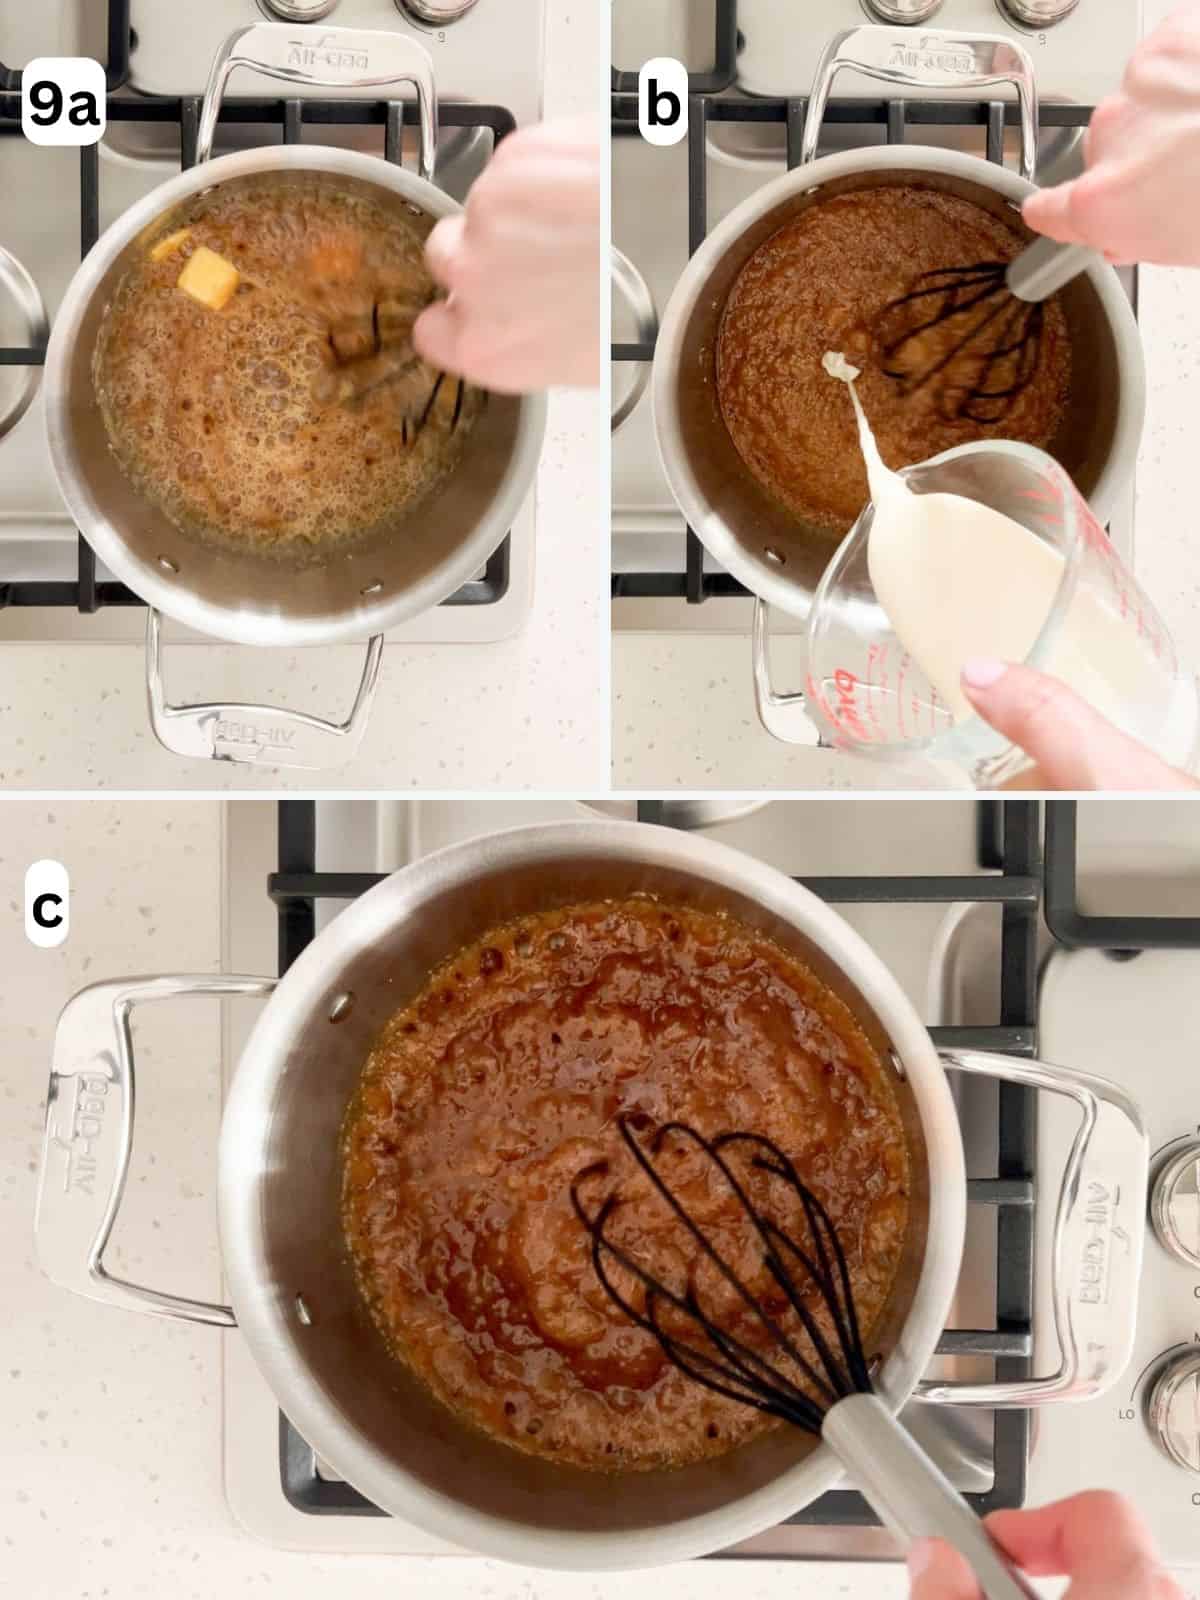 The butter, cream, and salt are whisked in to form a caramel sauce.